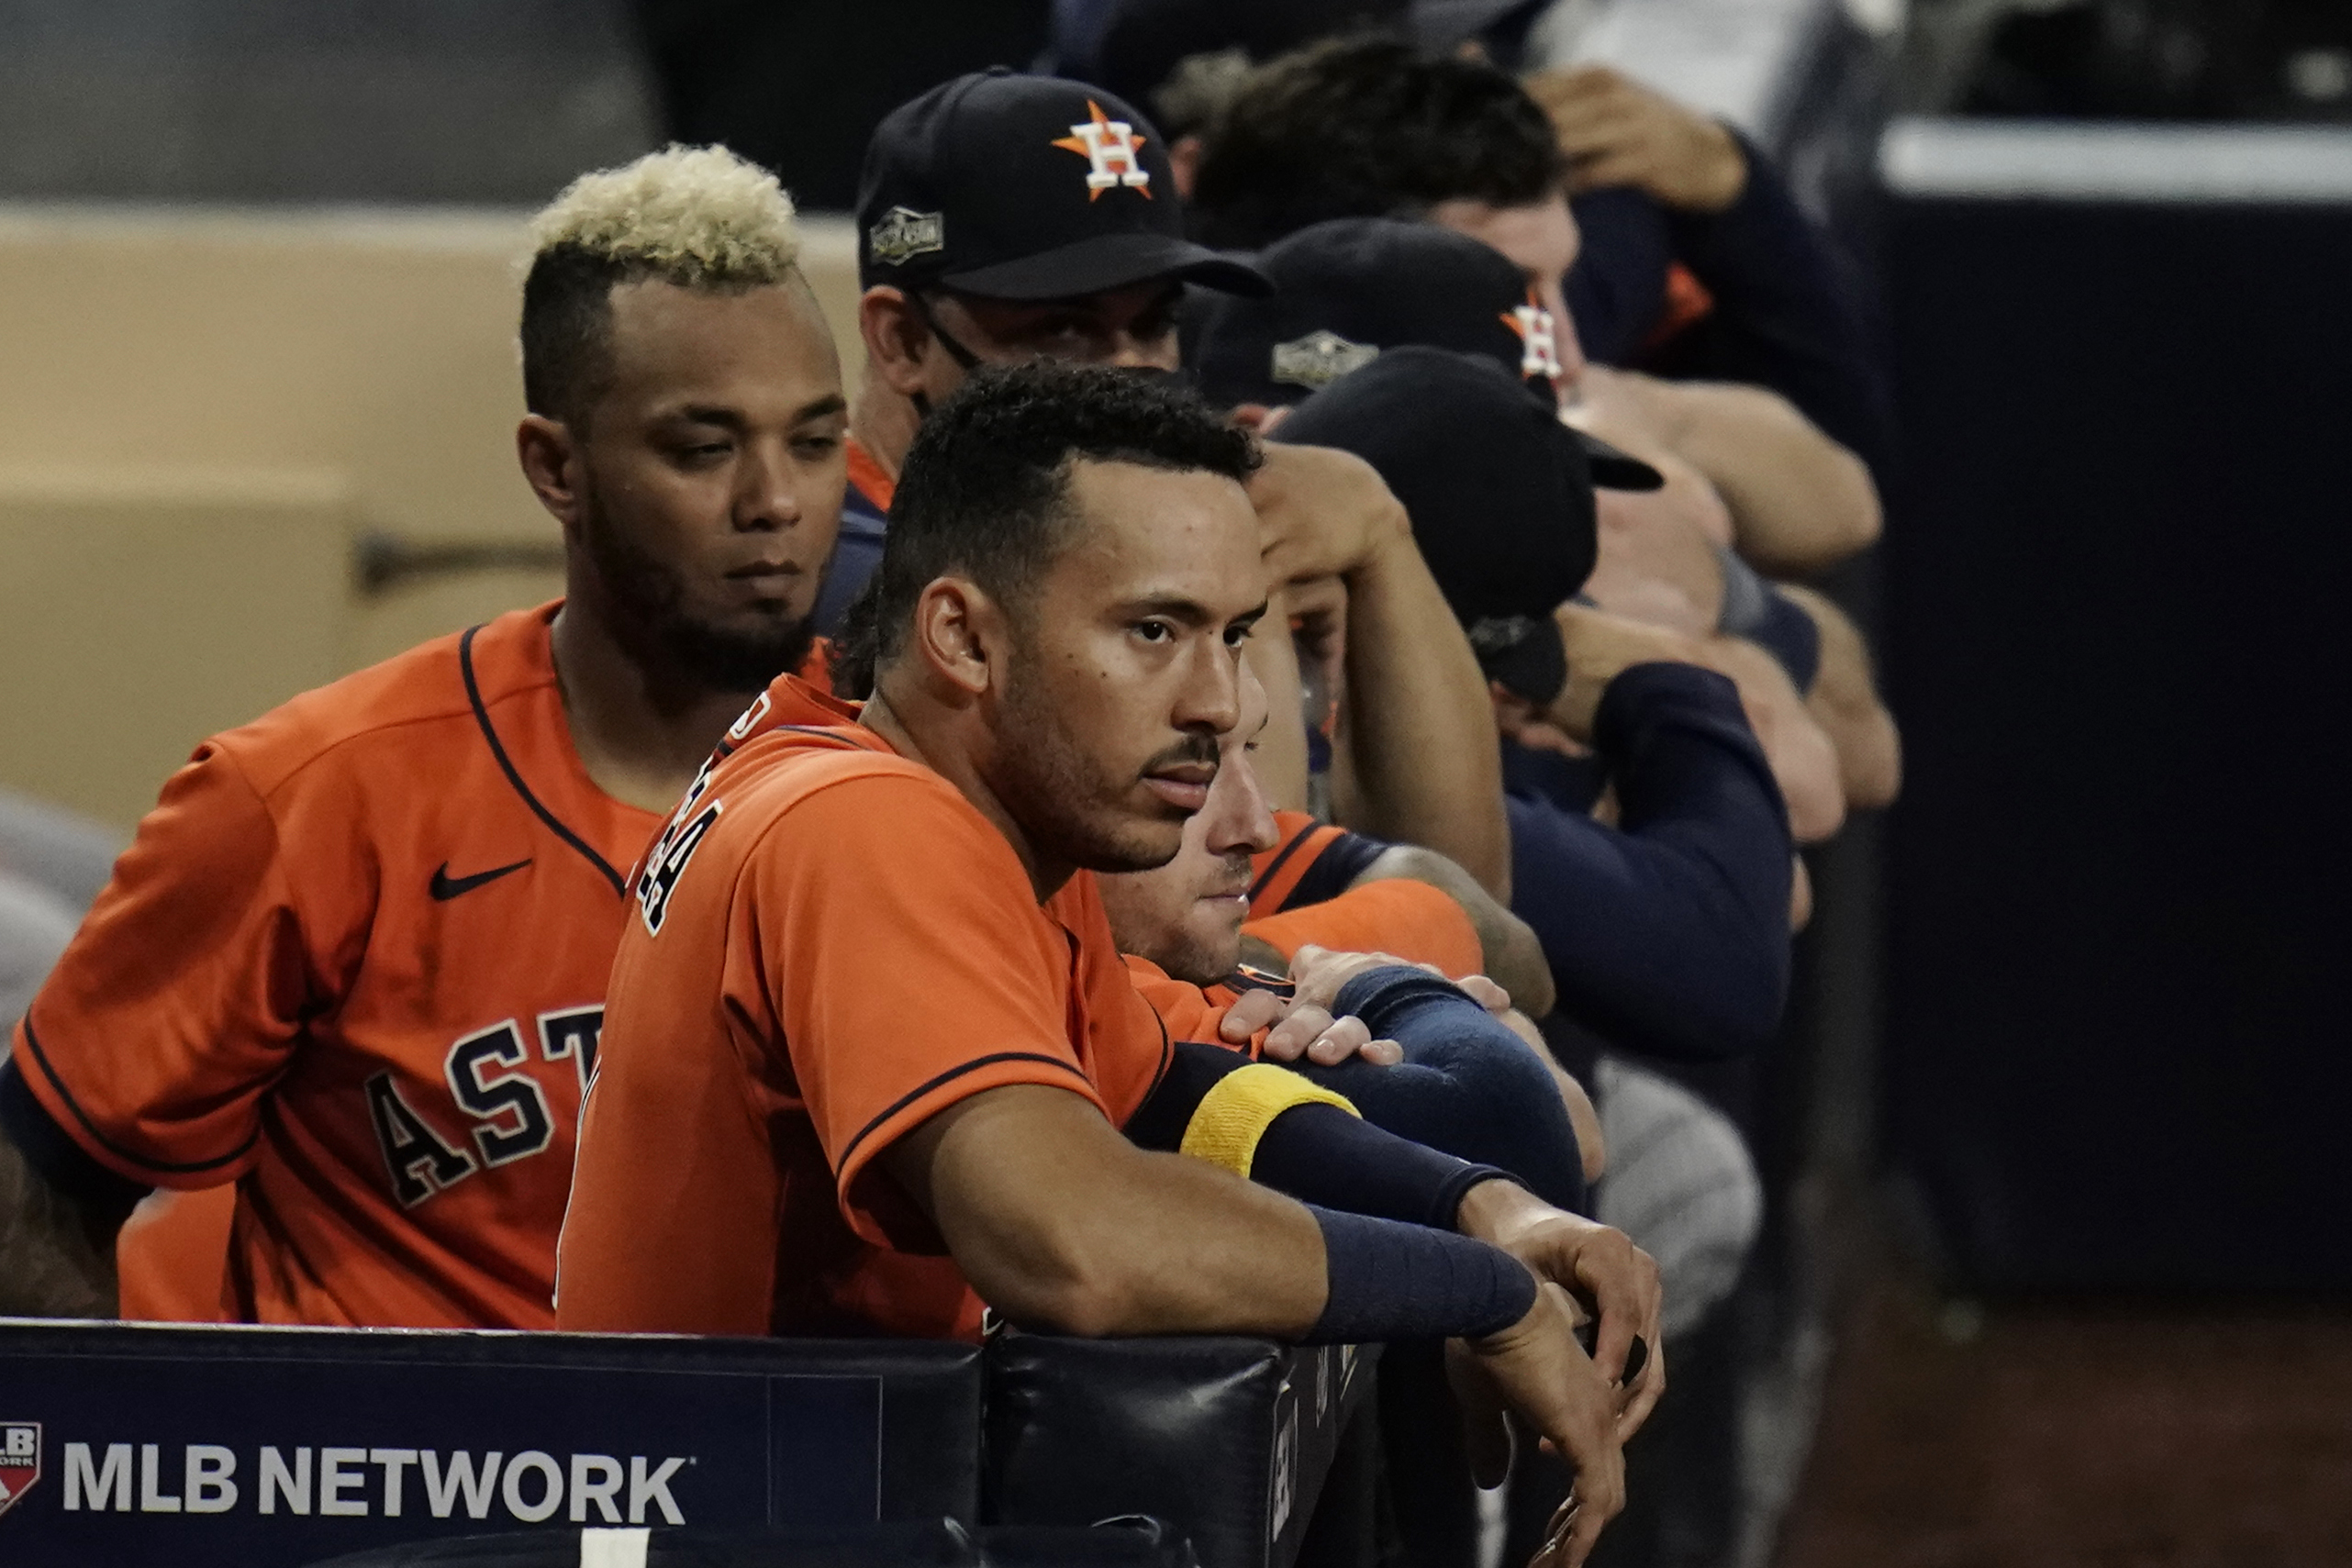 Astros hit with huge penalties for cheating during World Series